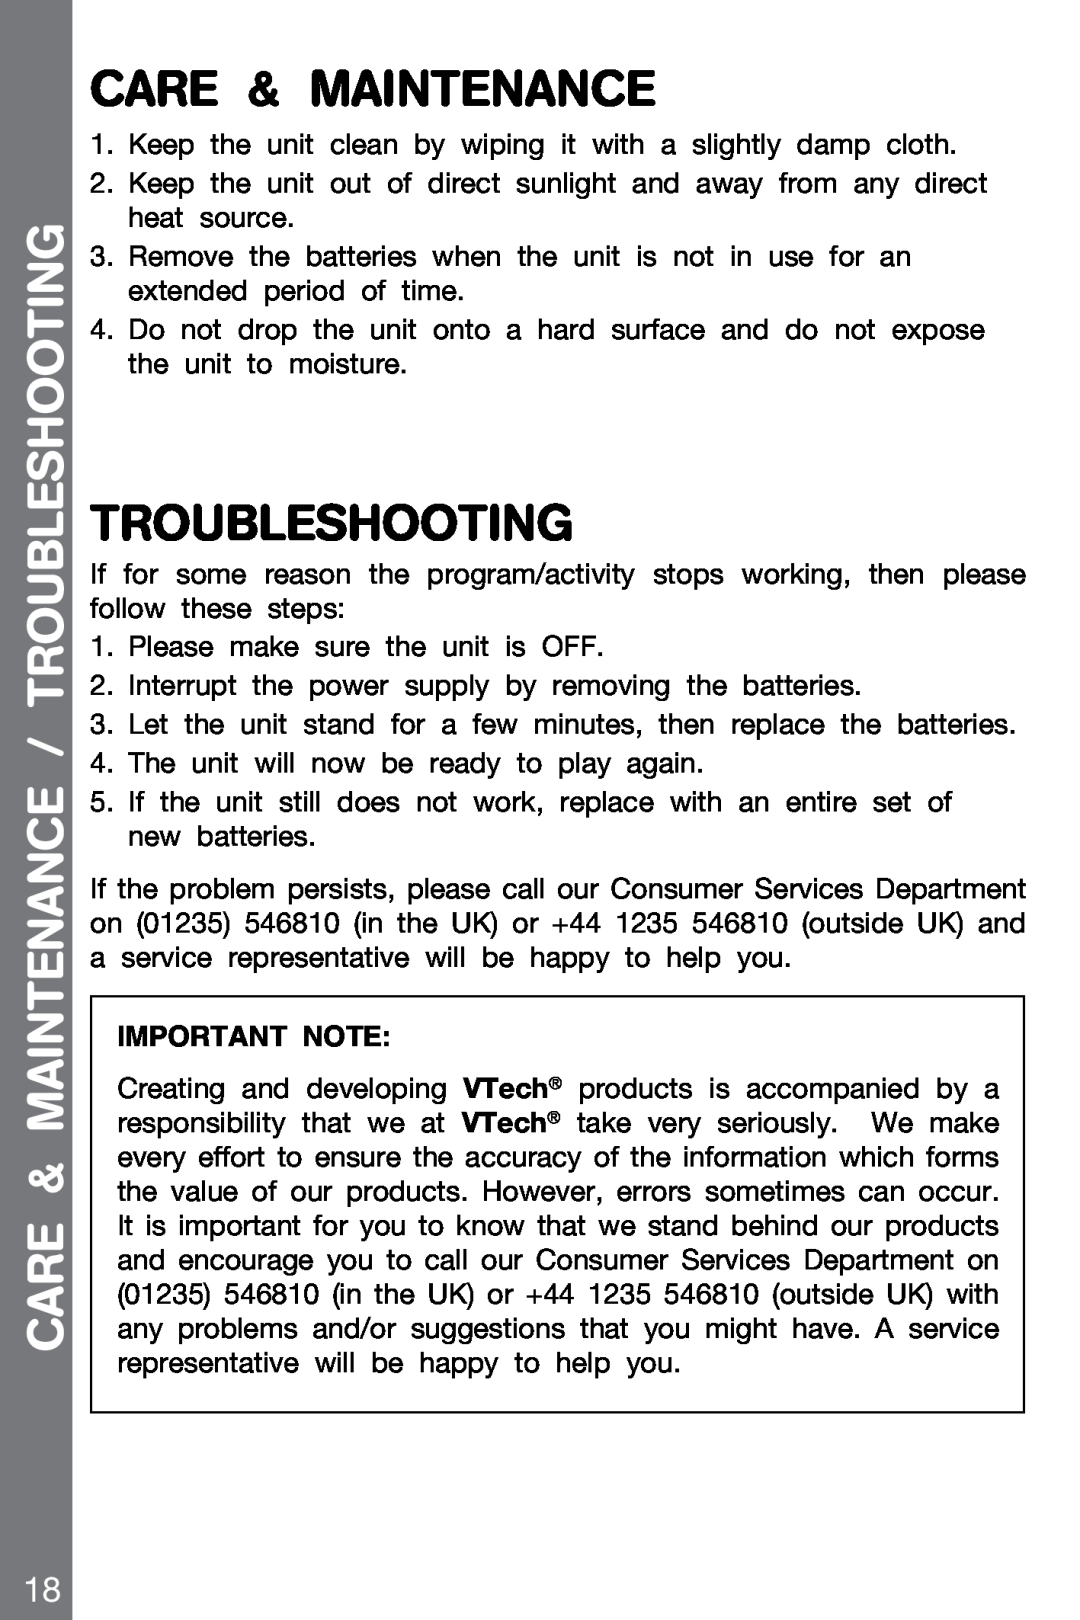 VTech 91-002136-014-000 user manual Care & Maintenance / Troubleshooting, Important Note 